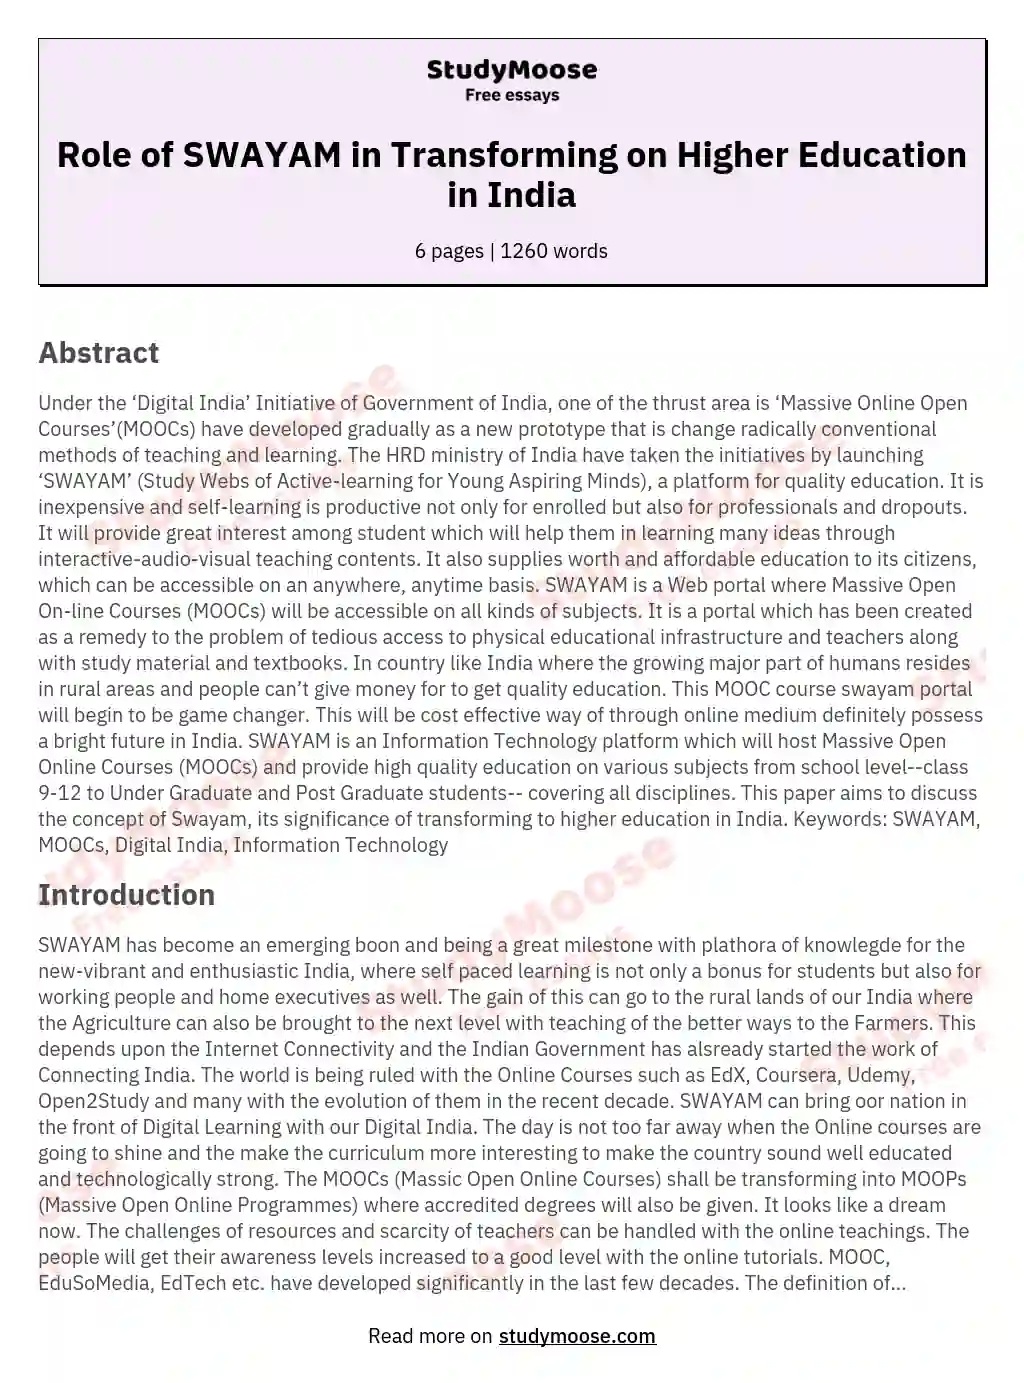 Role of SWAYAM in Transforming on Higher Education in India essay